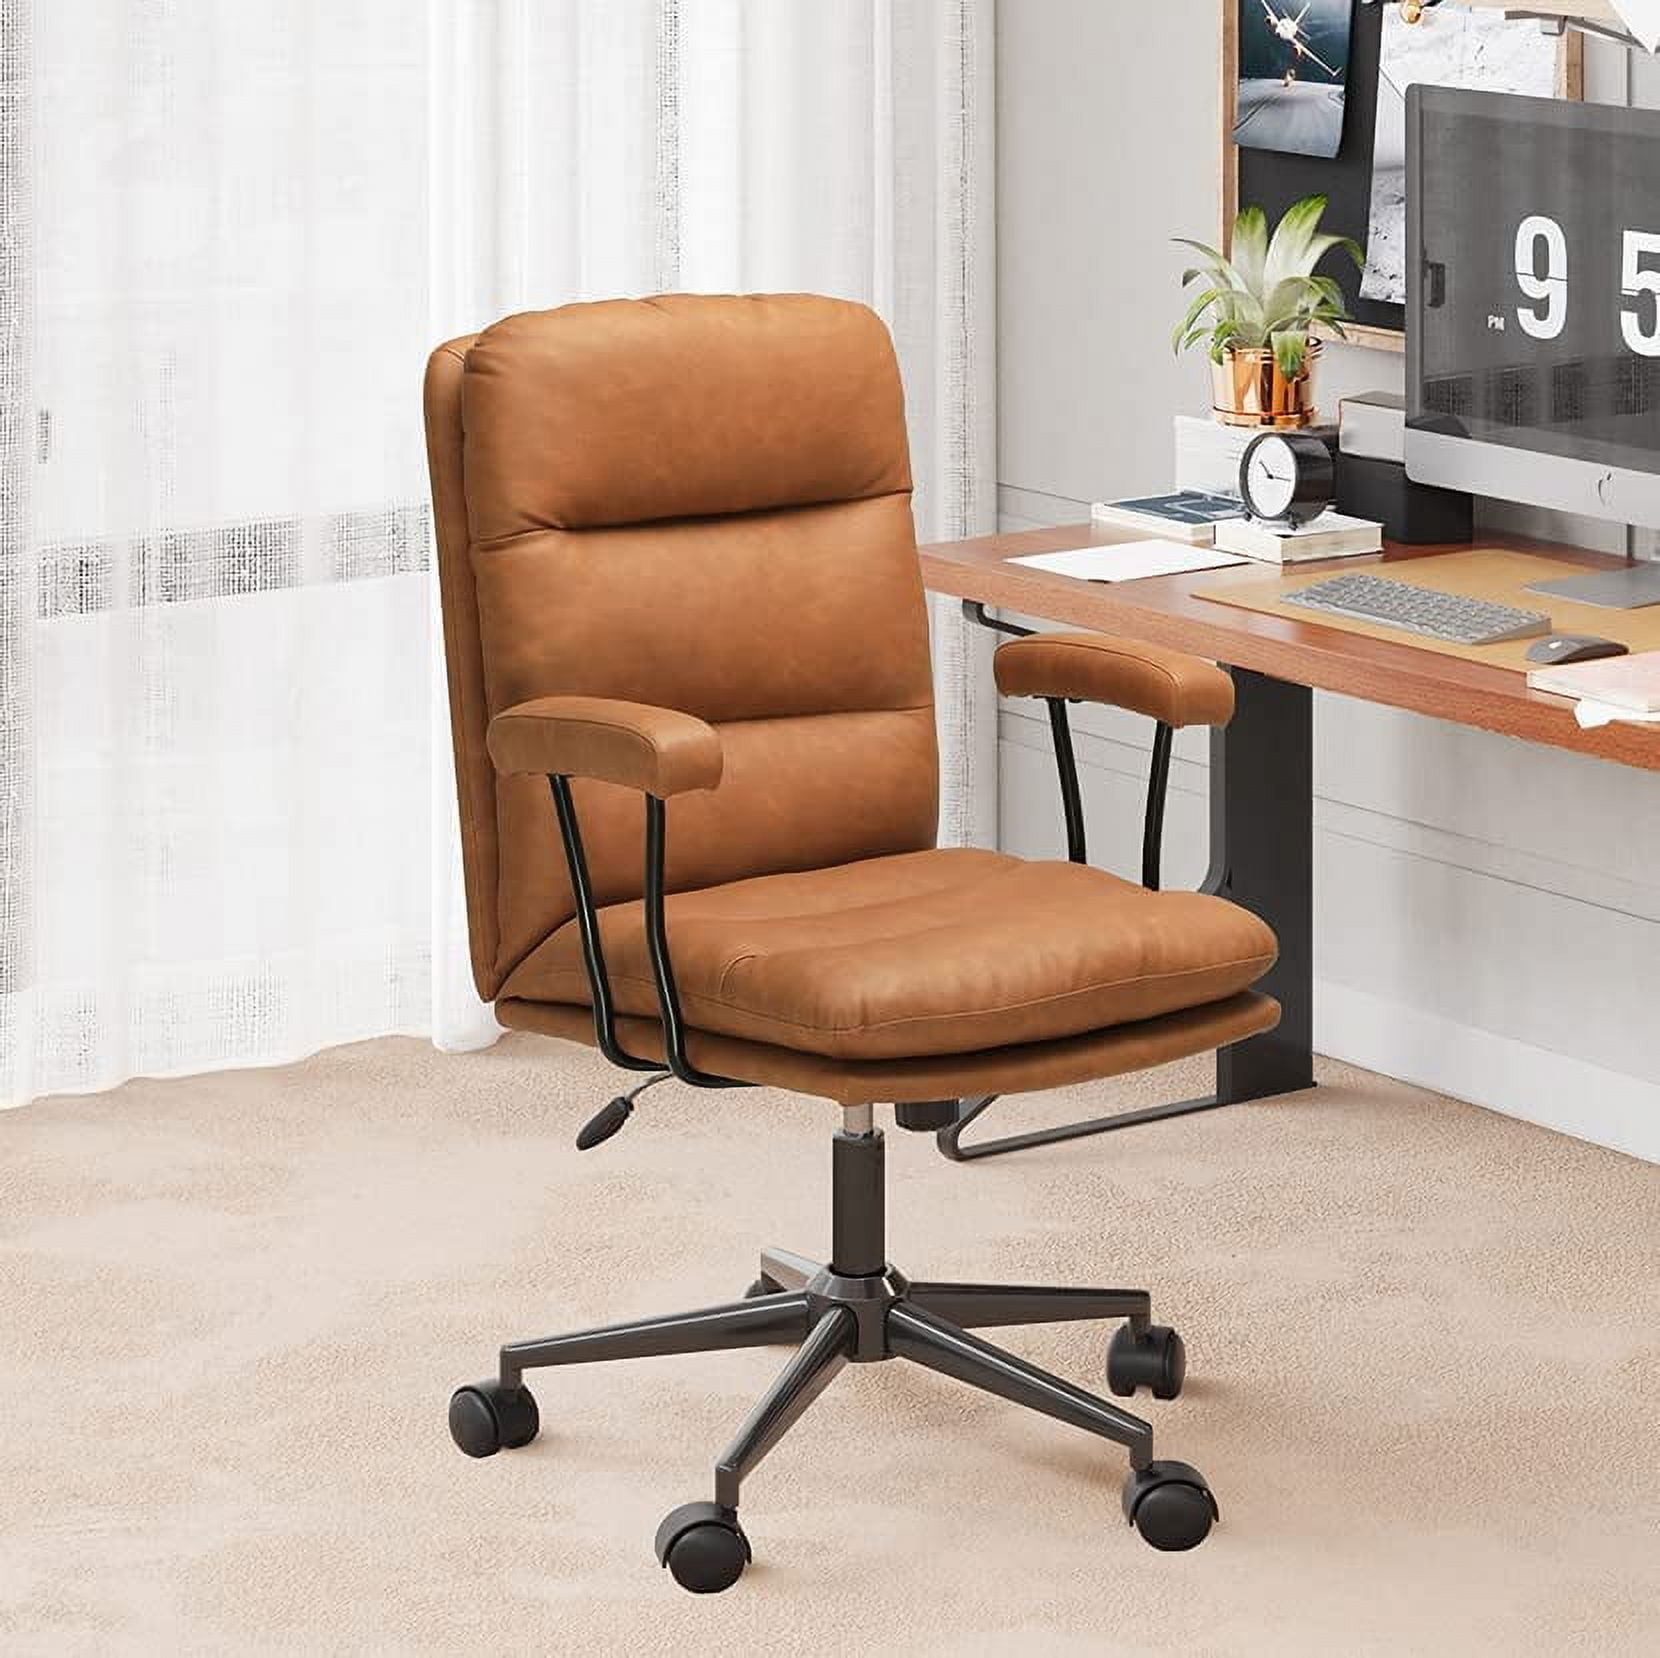 EPHEX Brown Leather Office Chair, Home Office Chair with Arms - Walmart.com